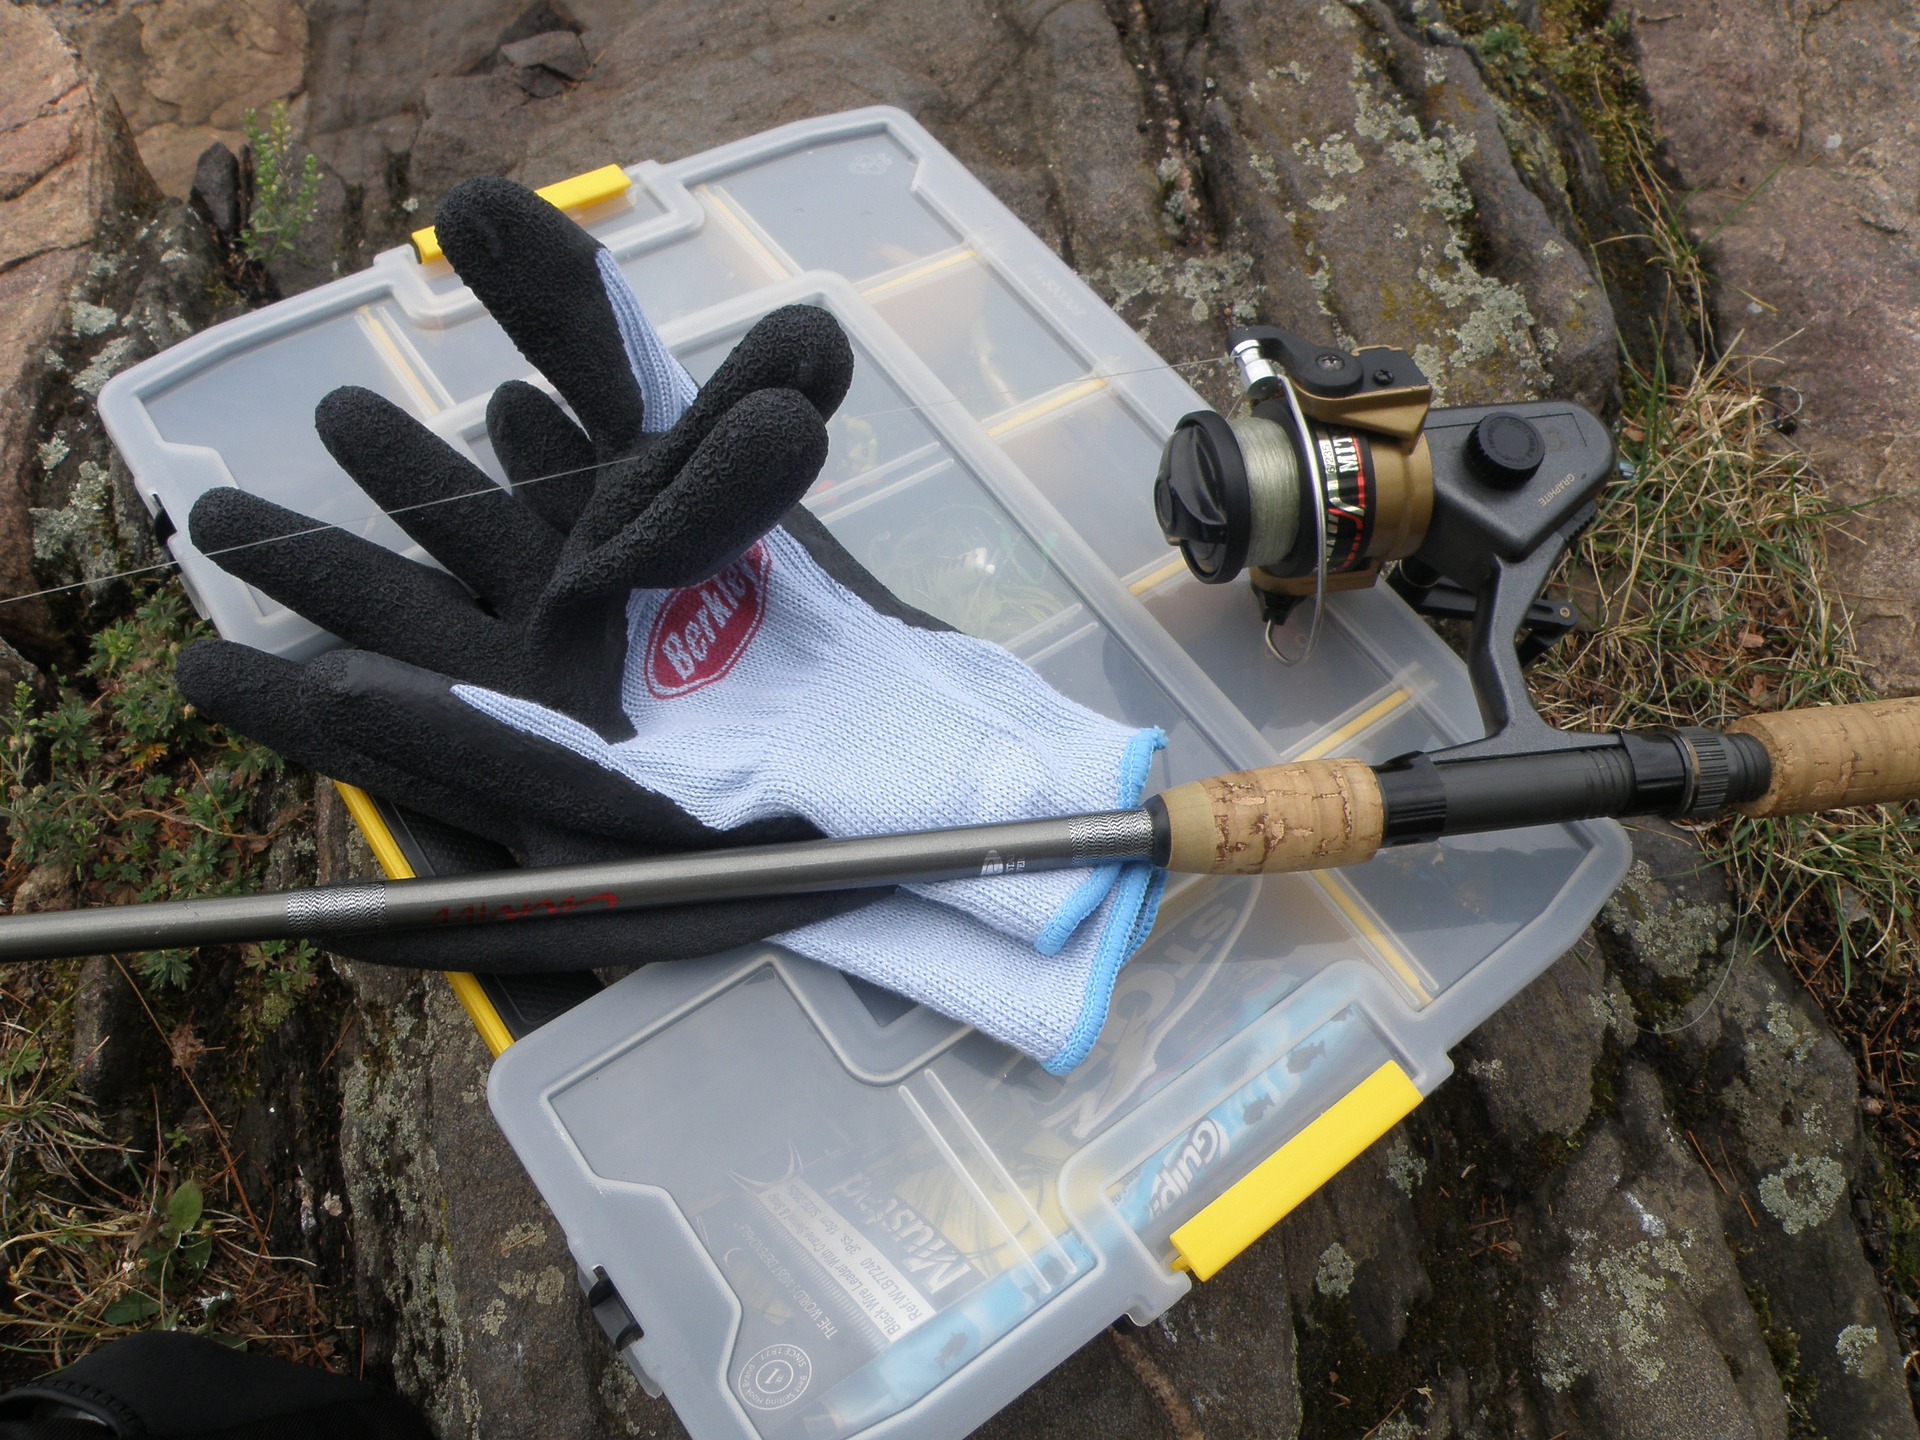 A fishing glove, rod, and reel resting on a tackle box.